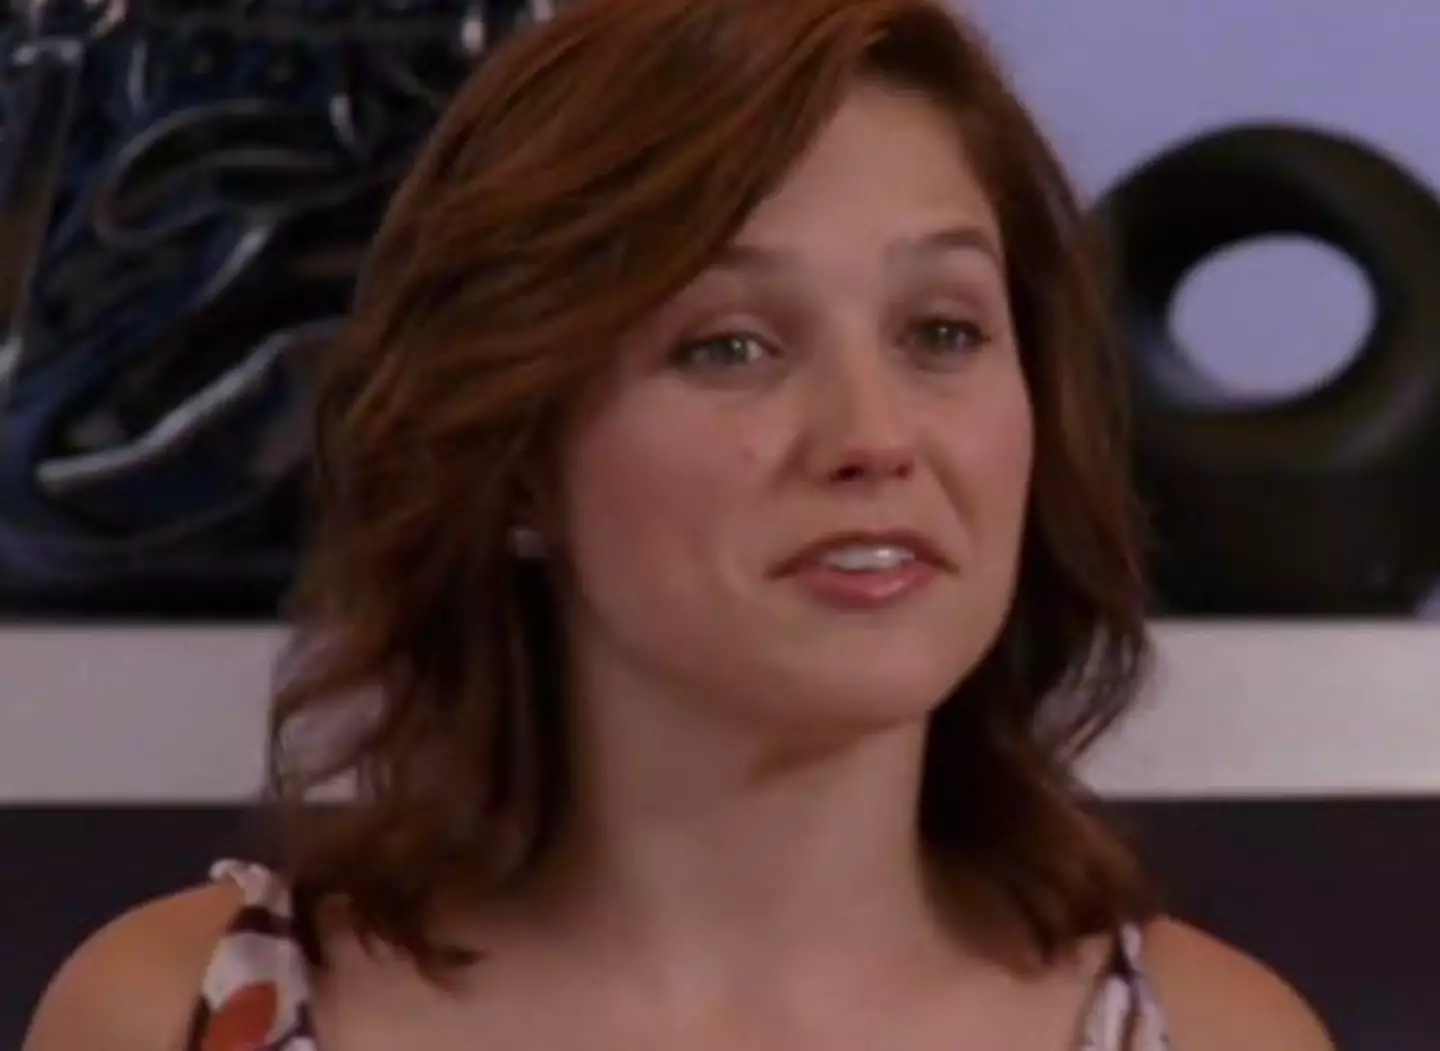 Bush is best known for her roles in One Tree Hill and Chicago PD.